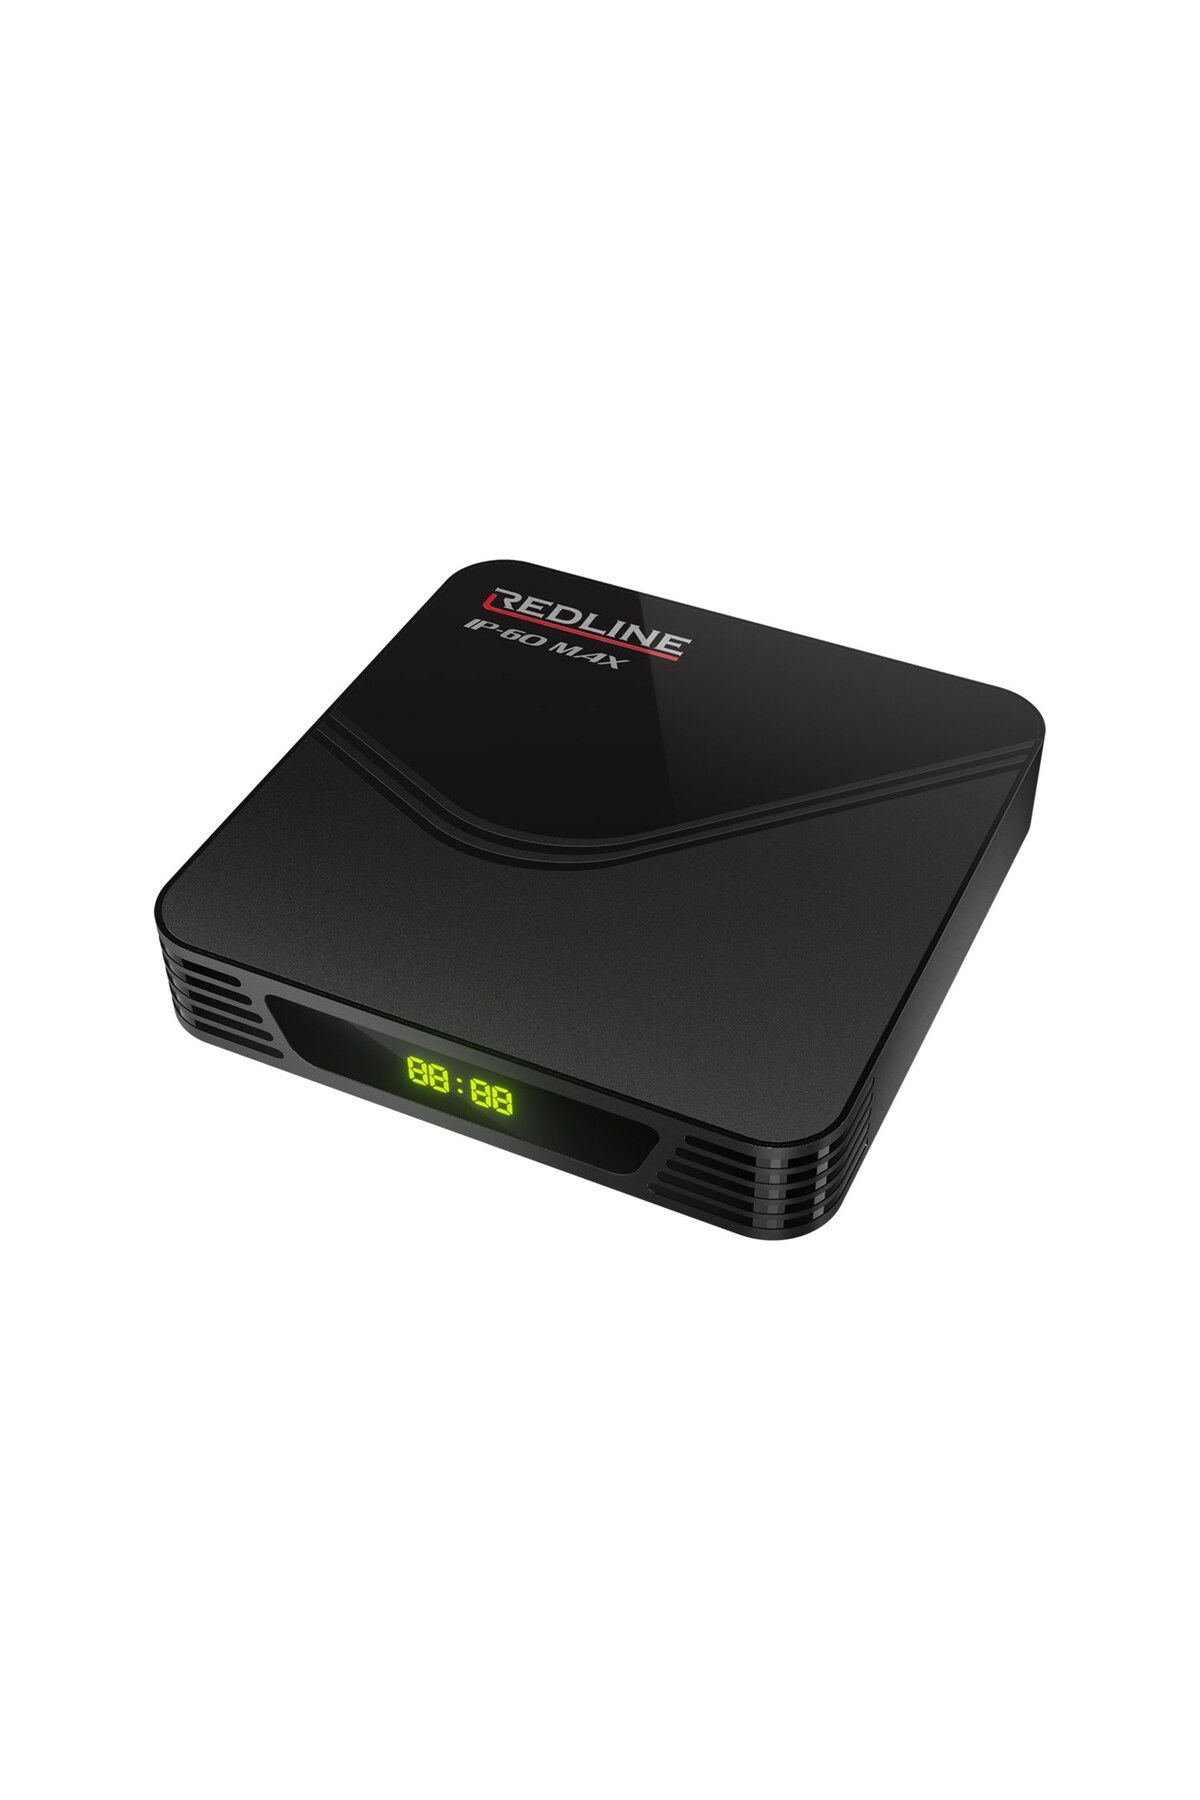 sommeow Özka Gsm sommeow Ip-60Max Android 10 / 4K Tv Box Ip-60 Max